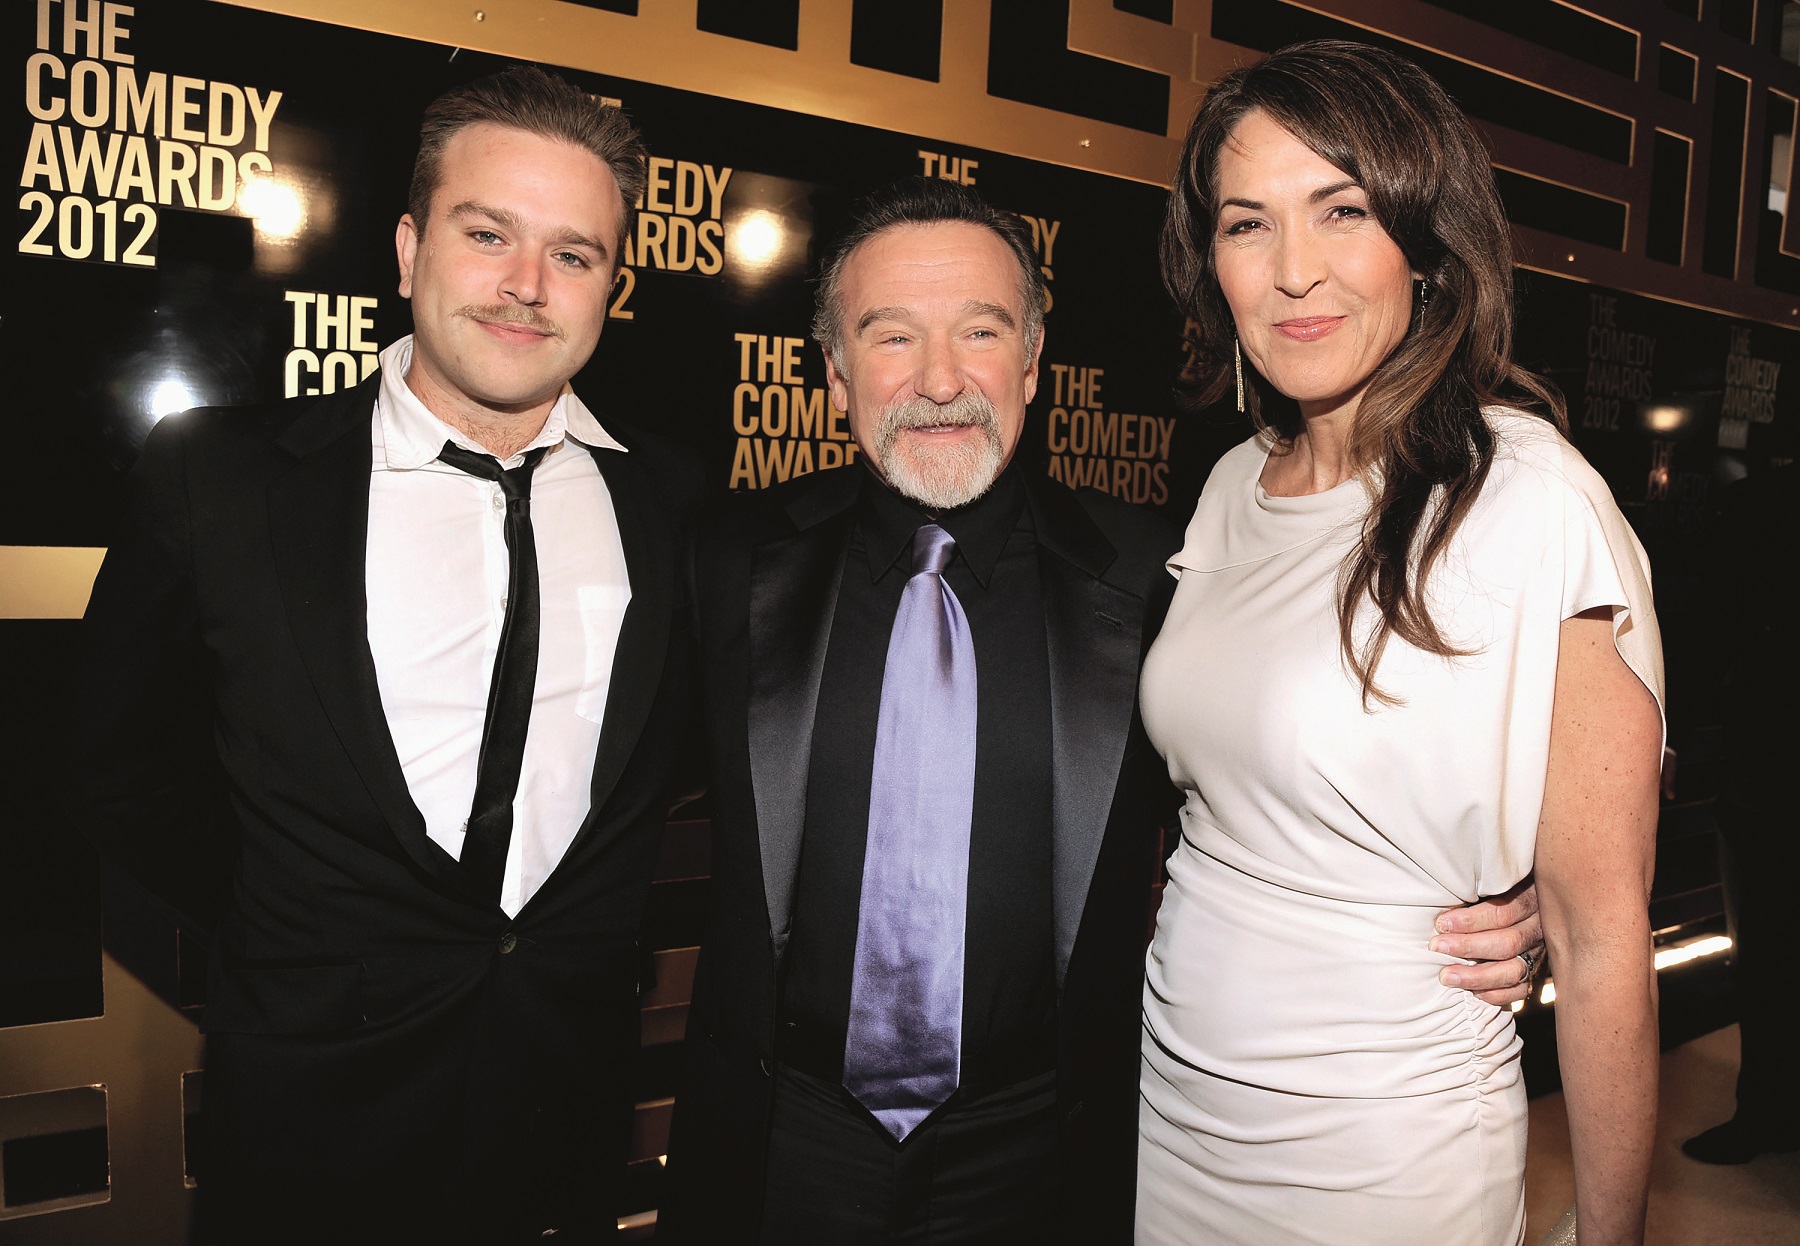 NEW YORK, NY - APRIL 28:  Zachary Pym Williams, Robin Williams and Susan Schneider attend The Comedy Awards 2012 at Hammerstein Ballroom on April 28, 2012 in New York City.  (Photo by Kevin Mazur/WireImage)